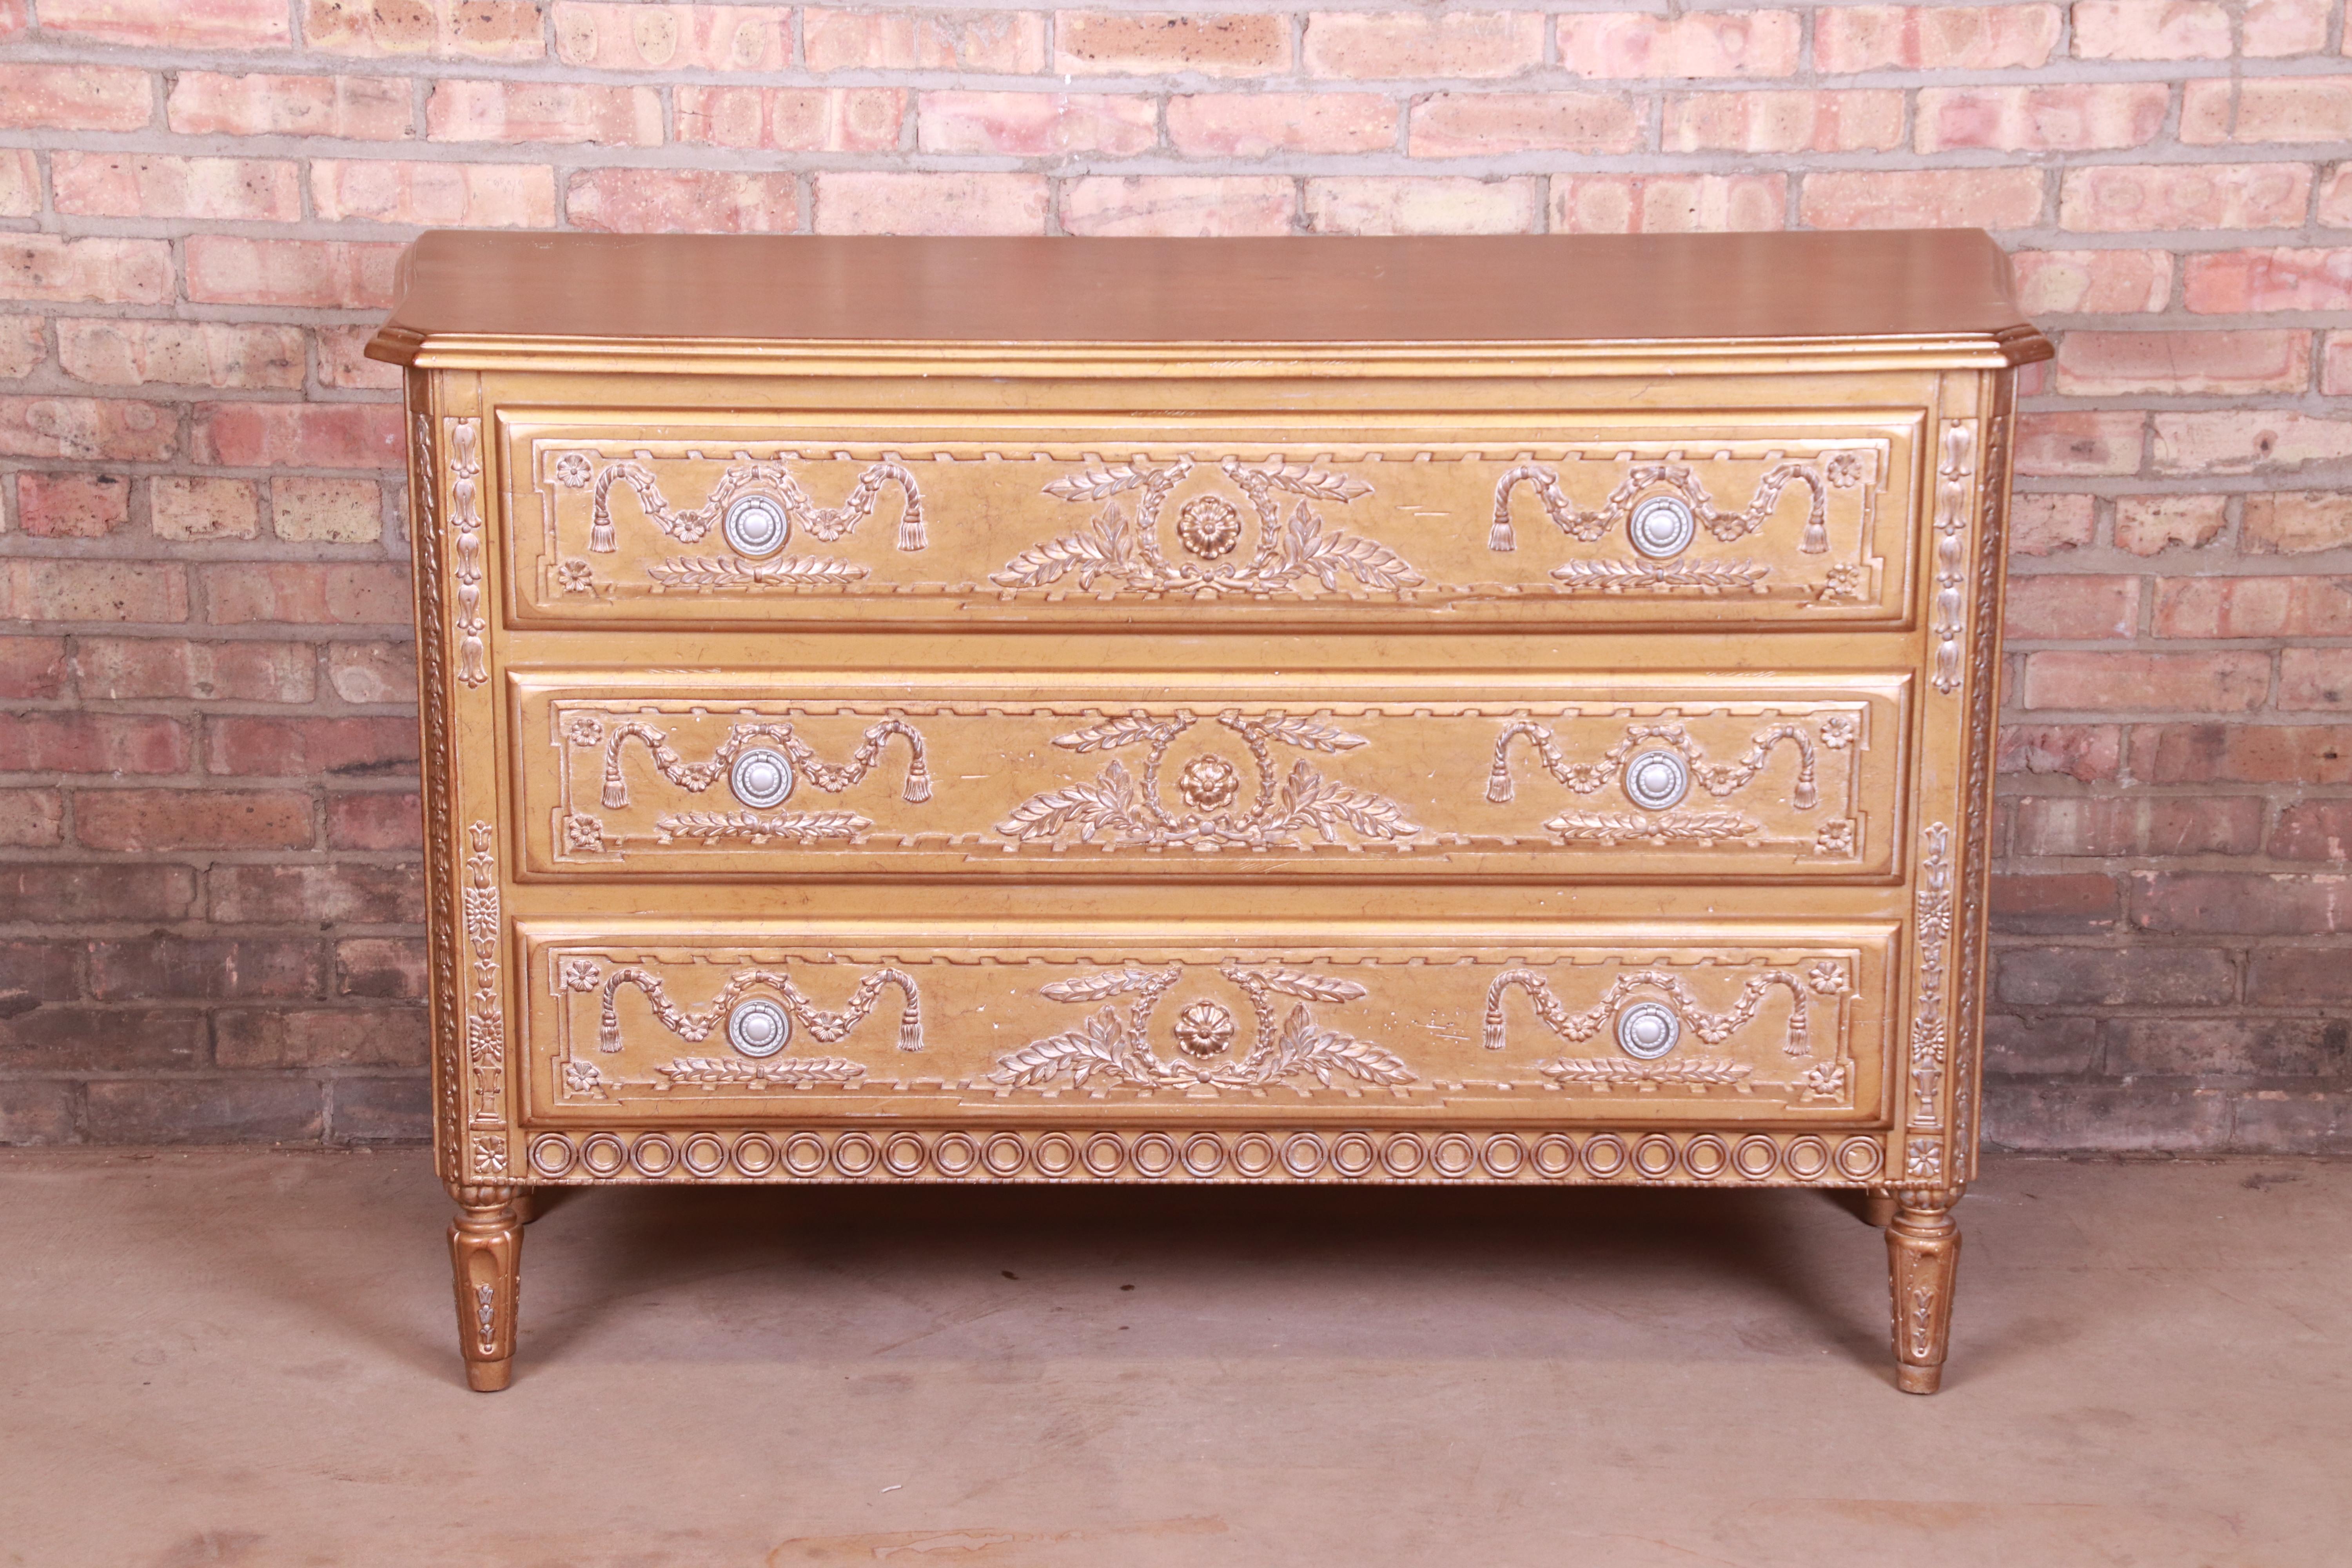 French Regency Louis XVI Gold Gilt Three-Drawer Dresser or Commode In Good Condition For Sale In South Bend, IN